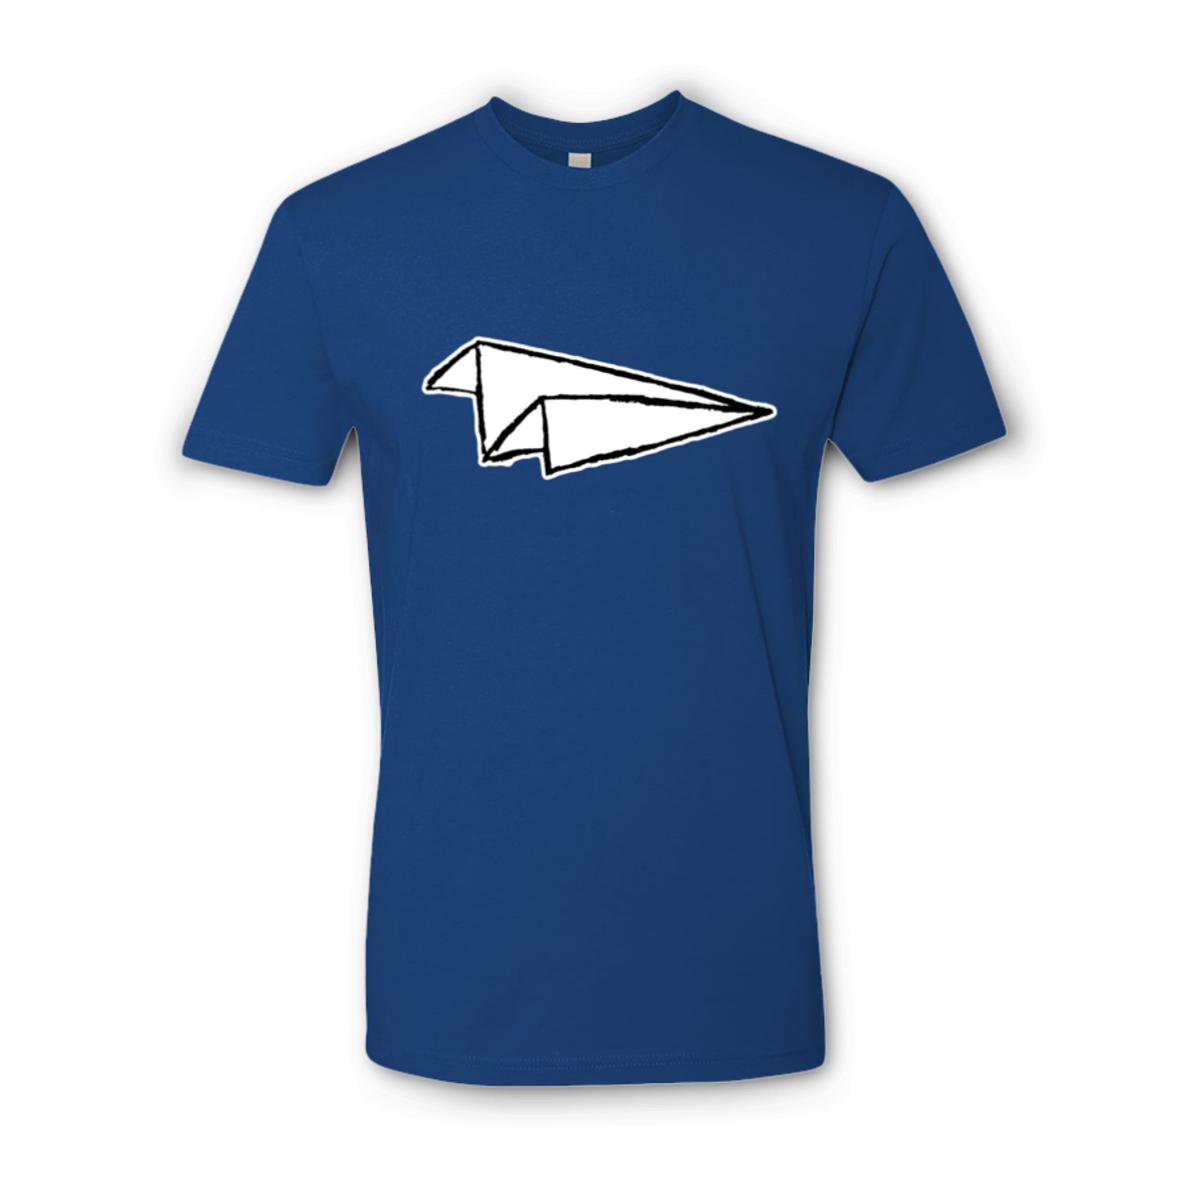 Airplane Sketch Unisex Tee Extra Large royal-blue